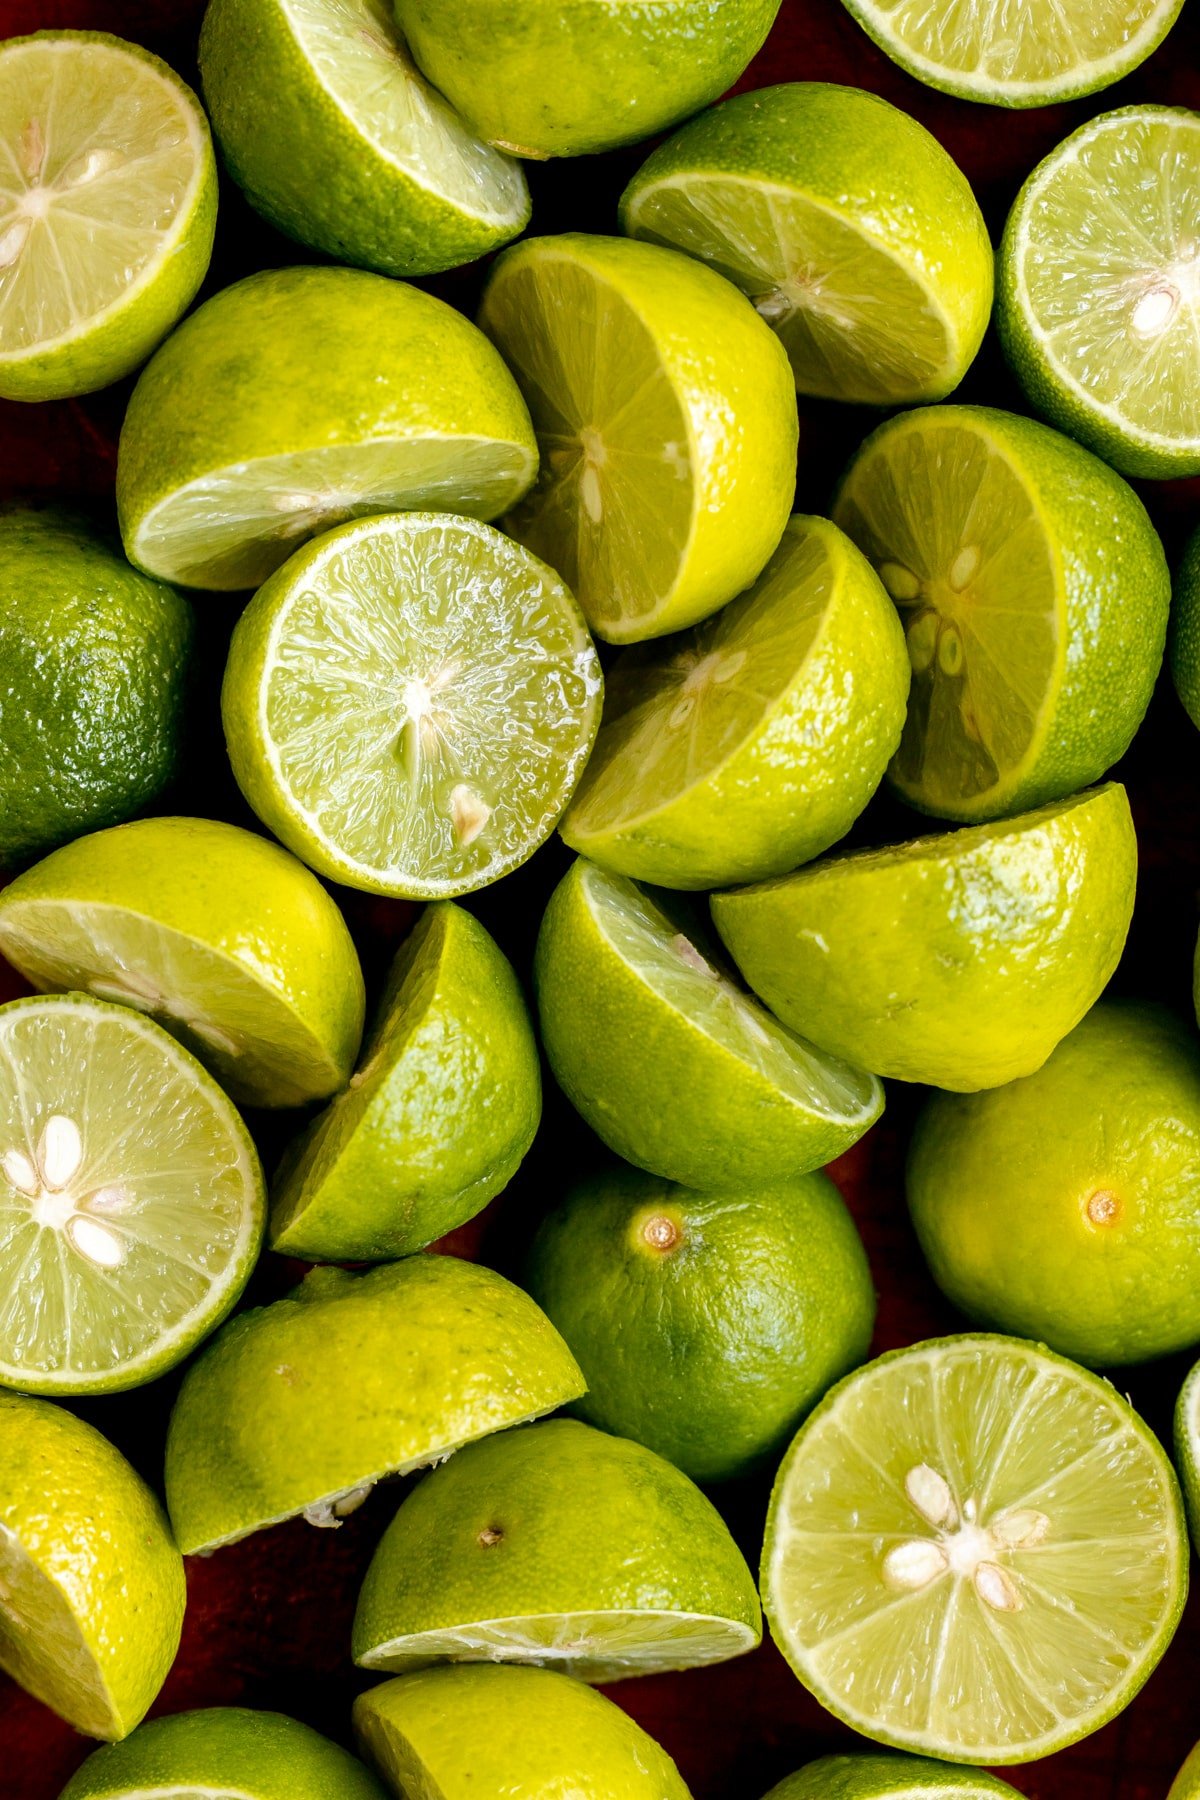 a close up image of limes.